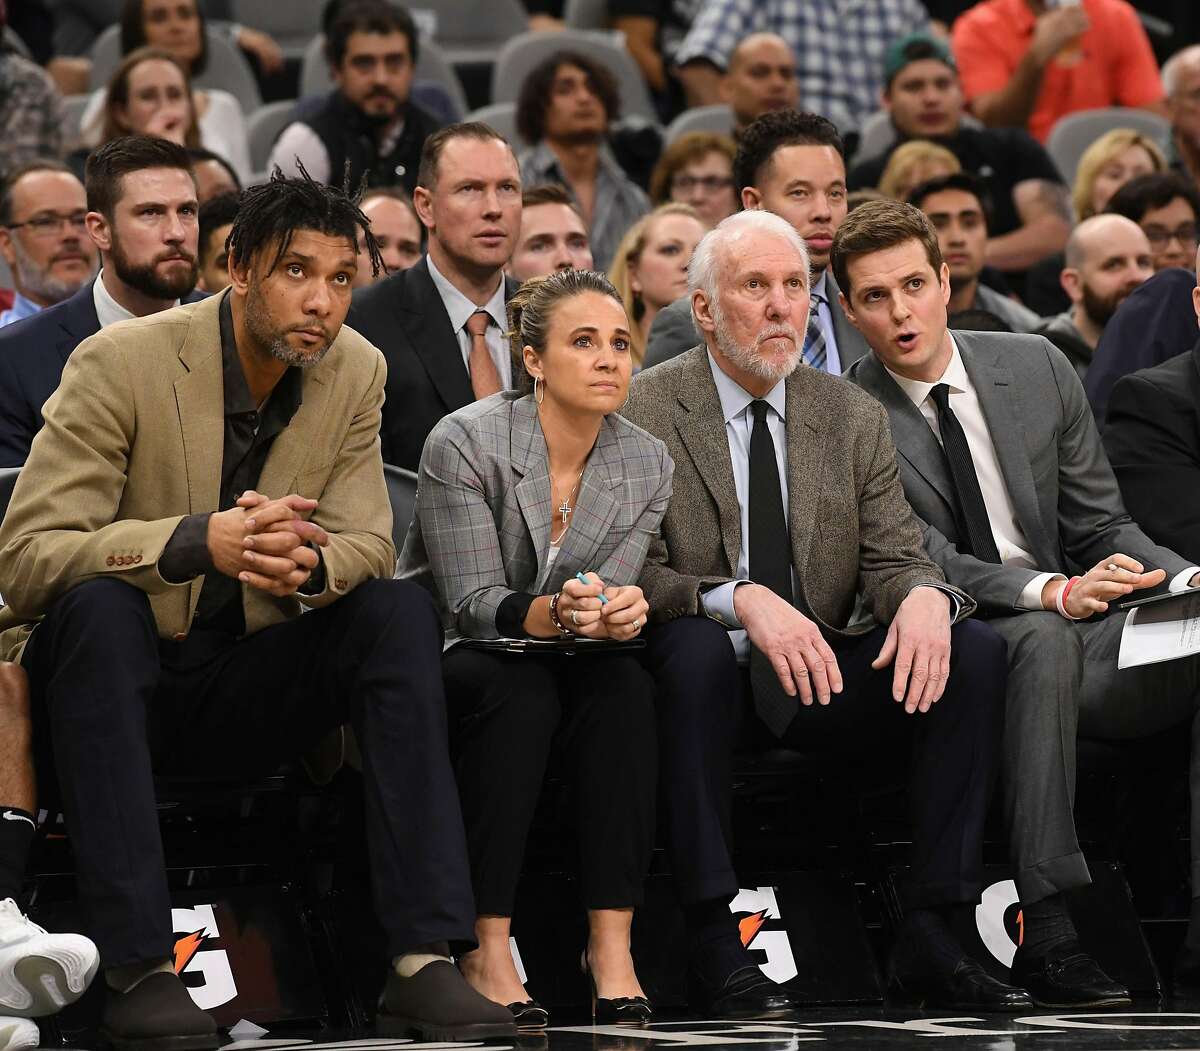 Spurs assistant 'made a strong impression' but was not hired by the Knicks